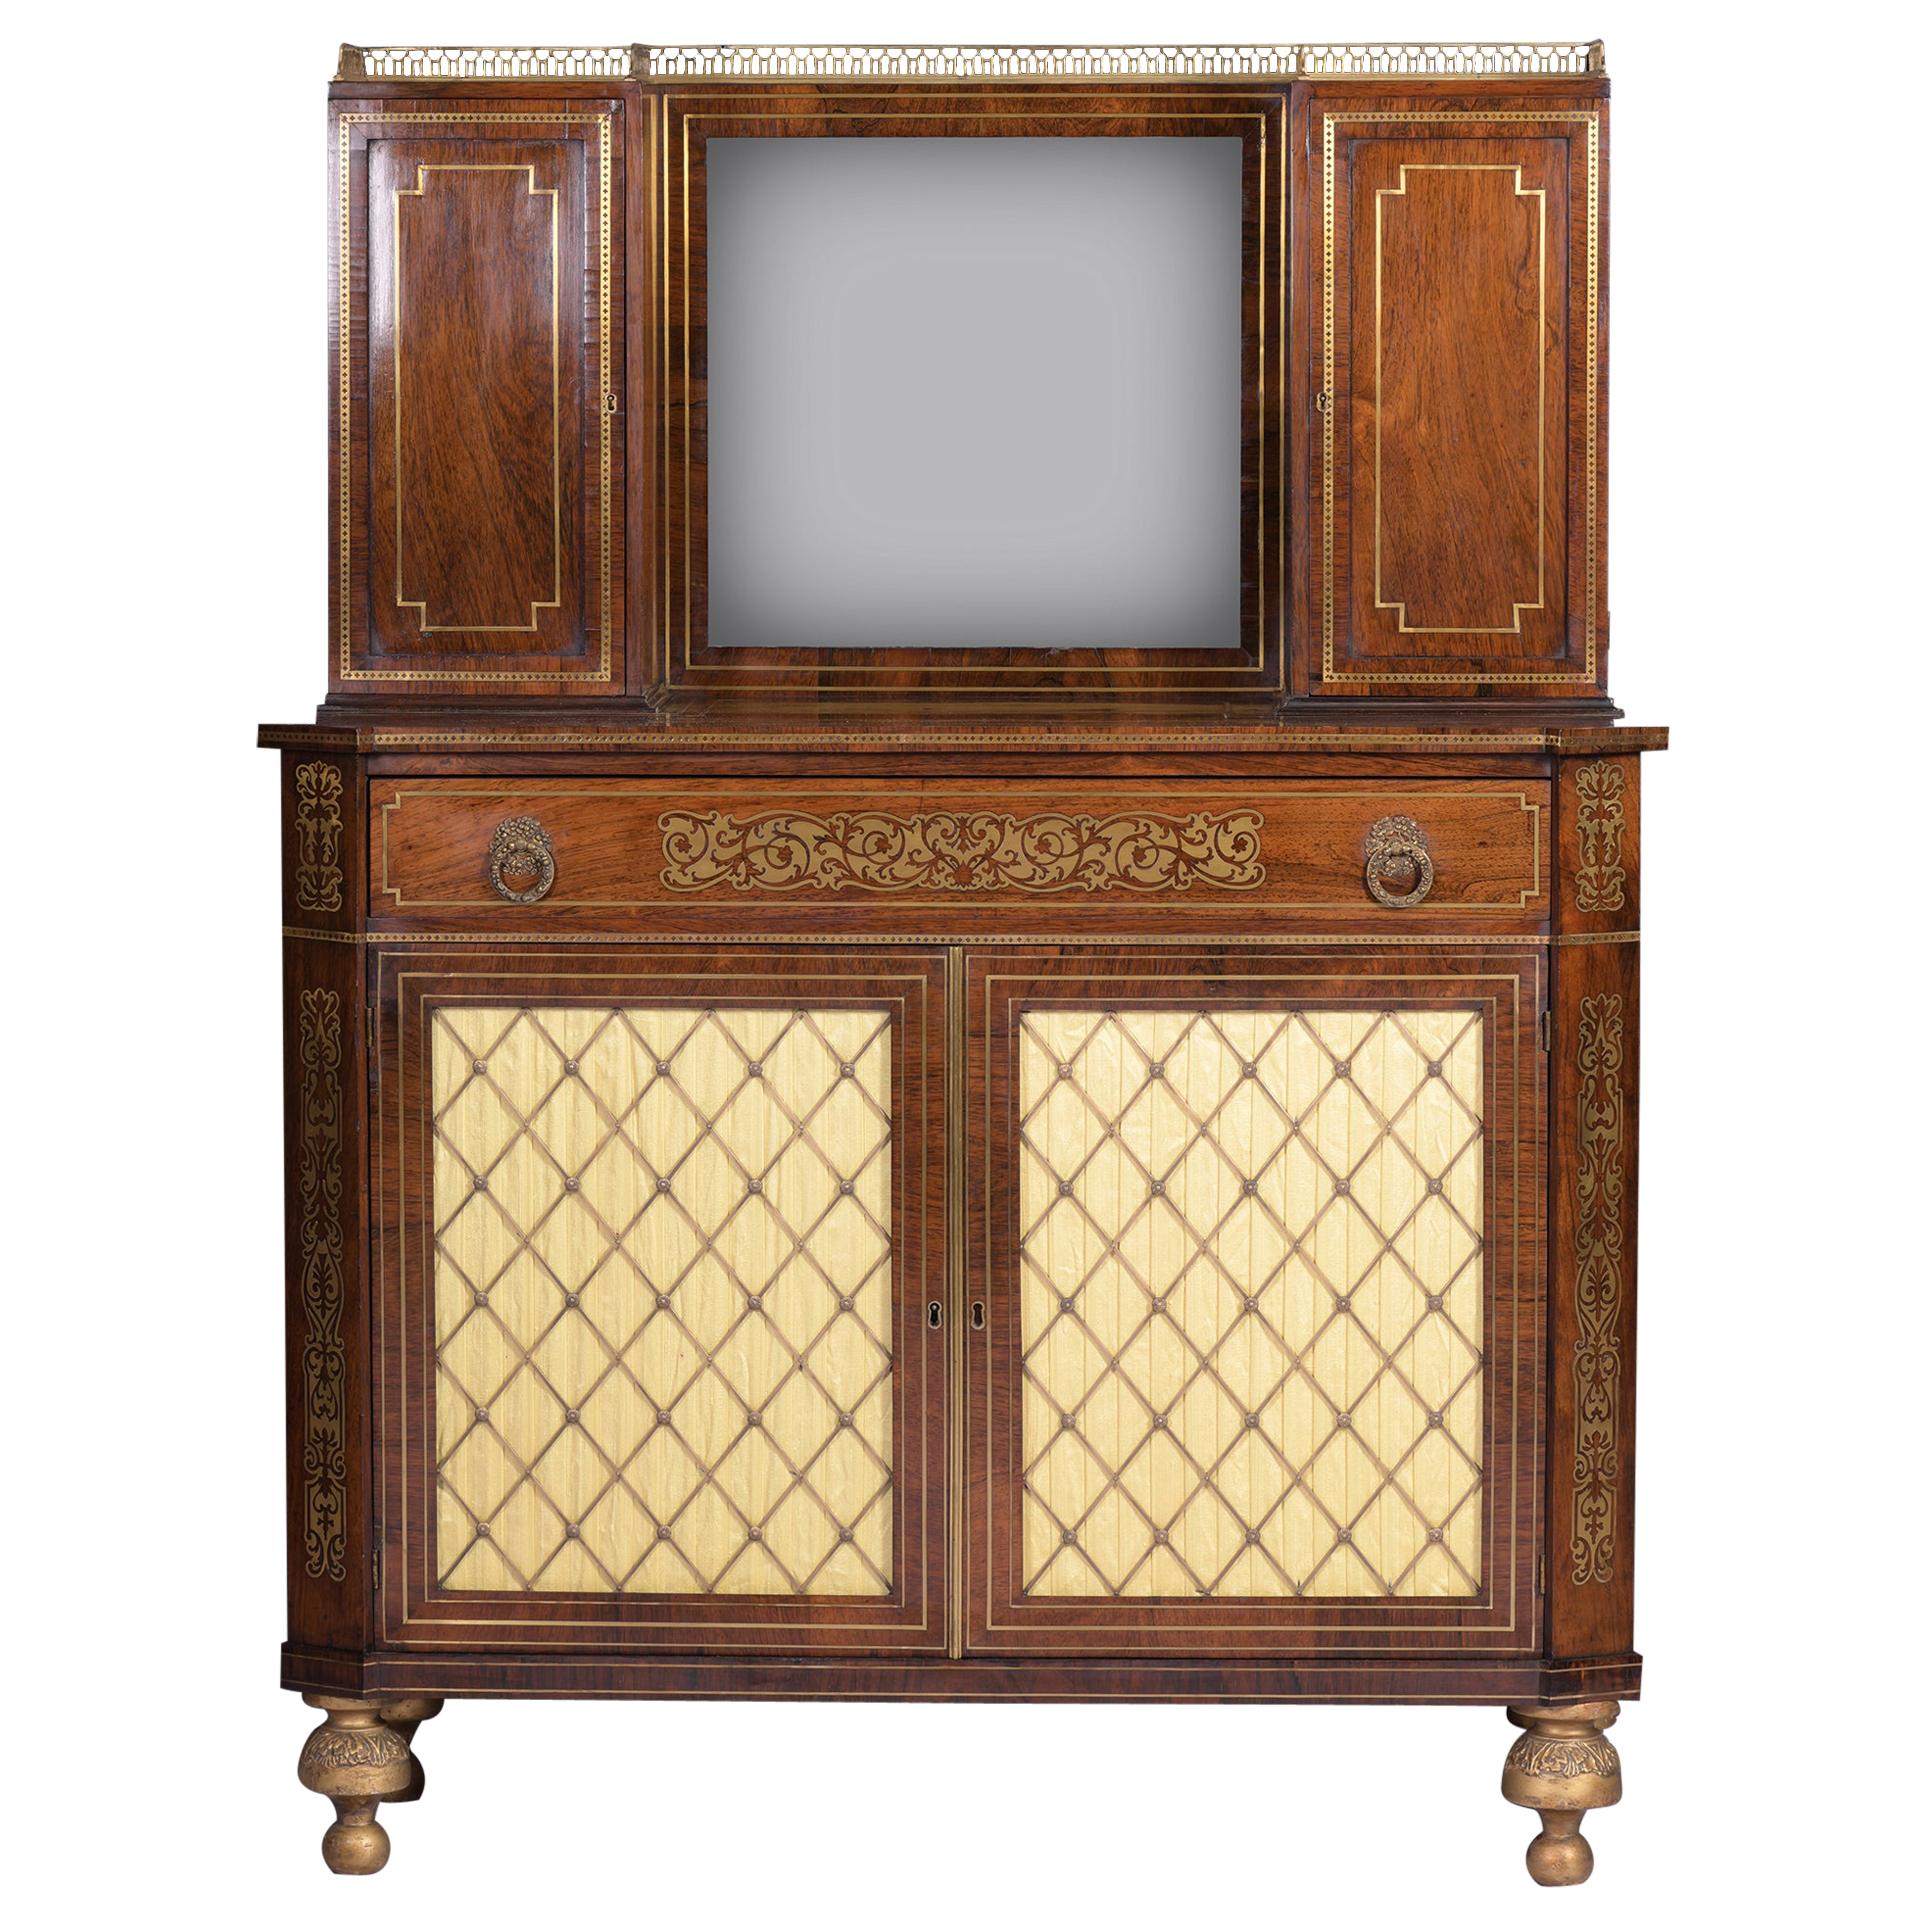 Early 19th Century English Regency Side Cabinet in the Manner of John Mclean For Sale